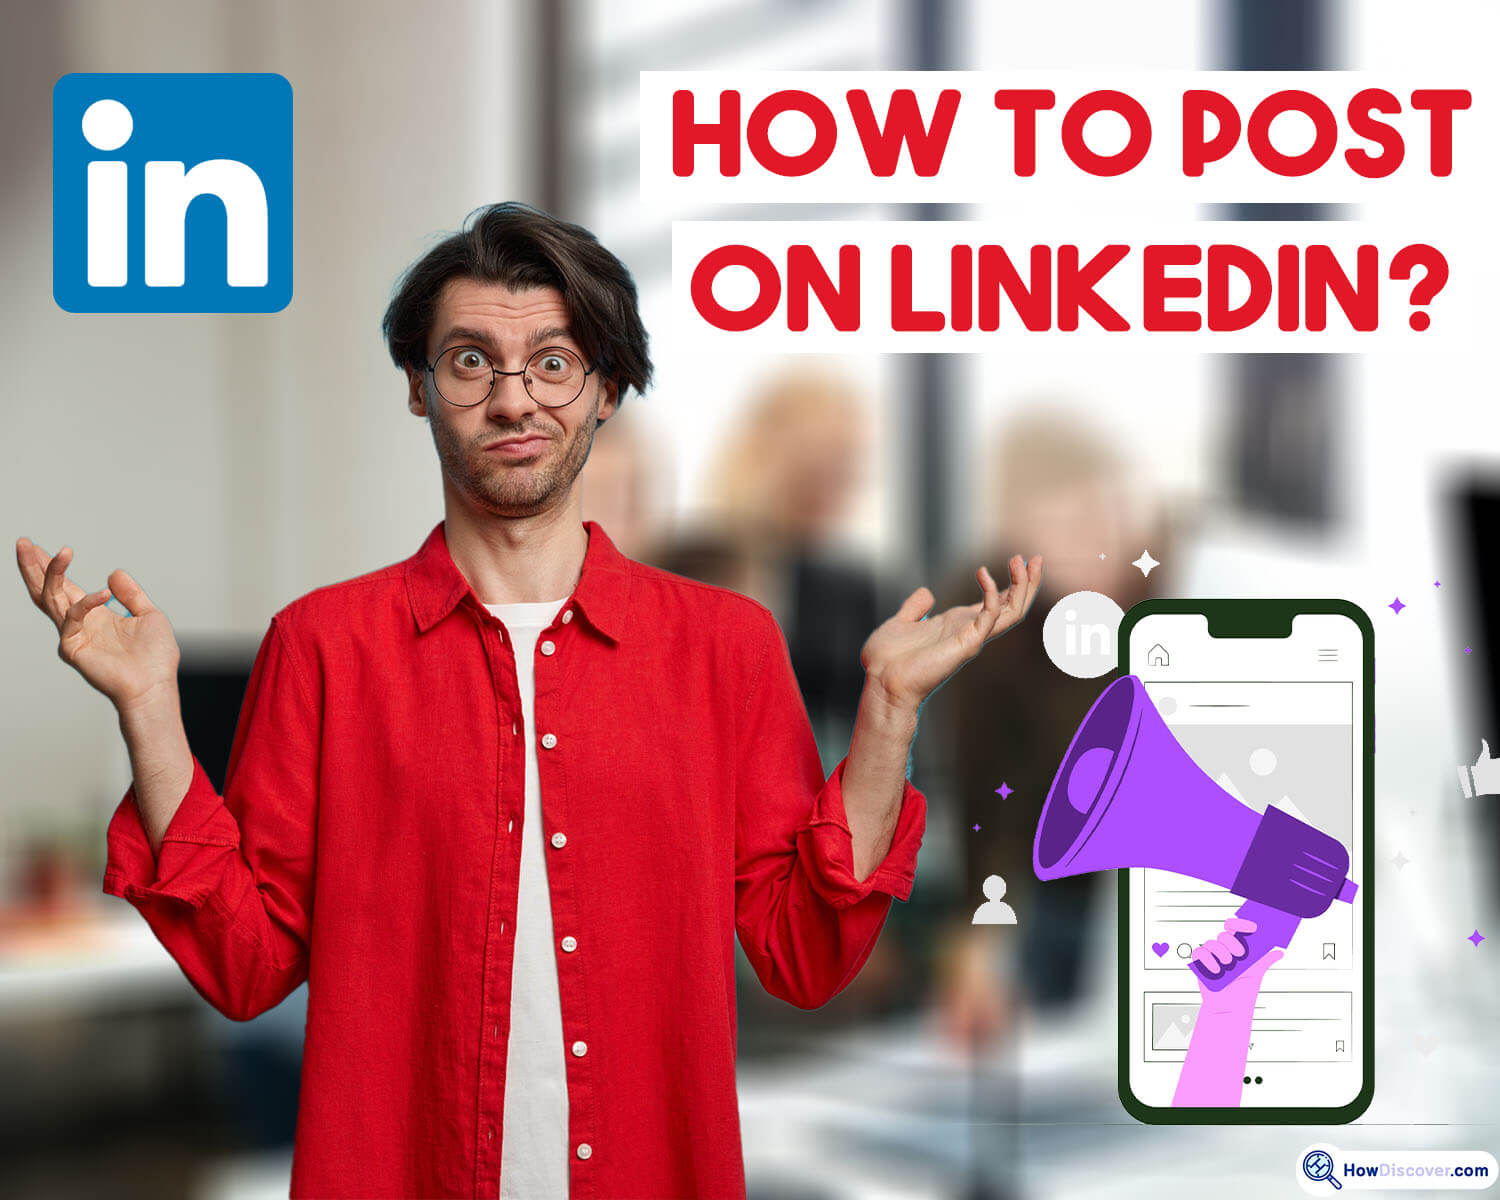 How to post on LinkedIn - How to post on LinkedIn while you are using a laptop or PC